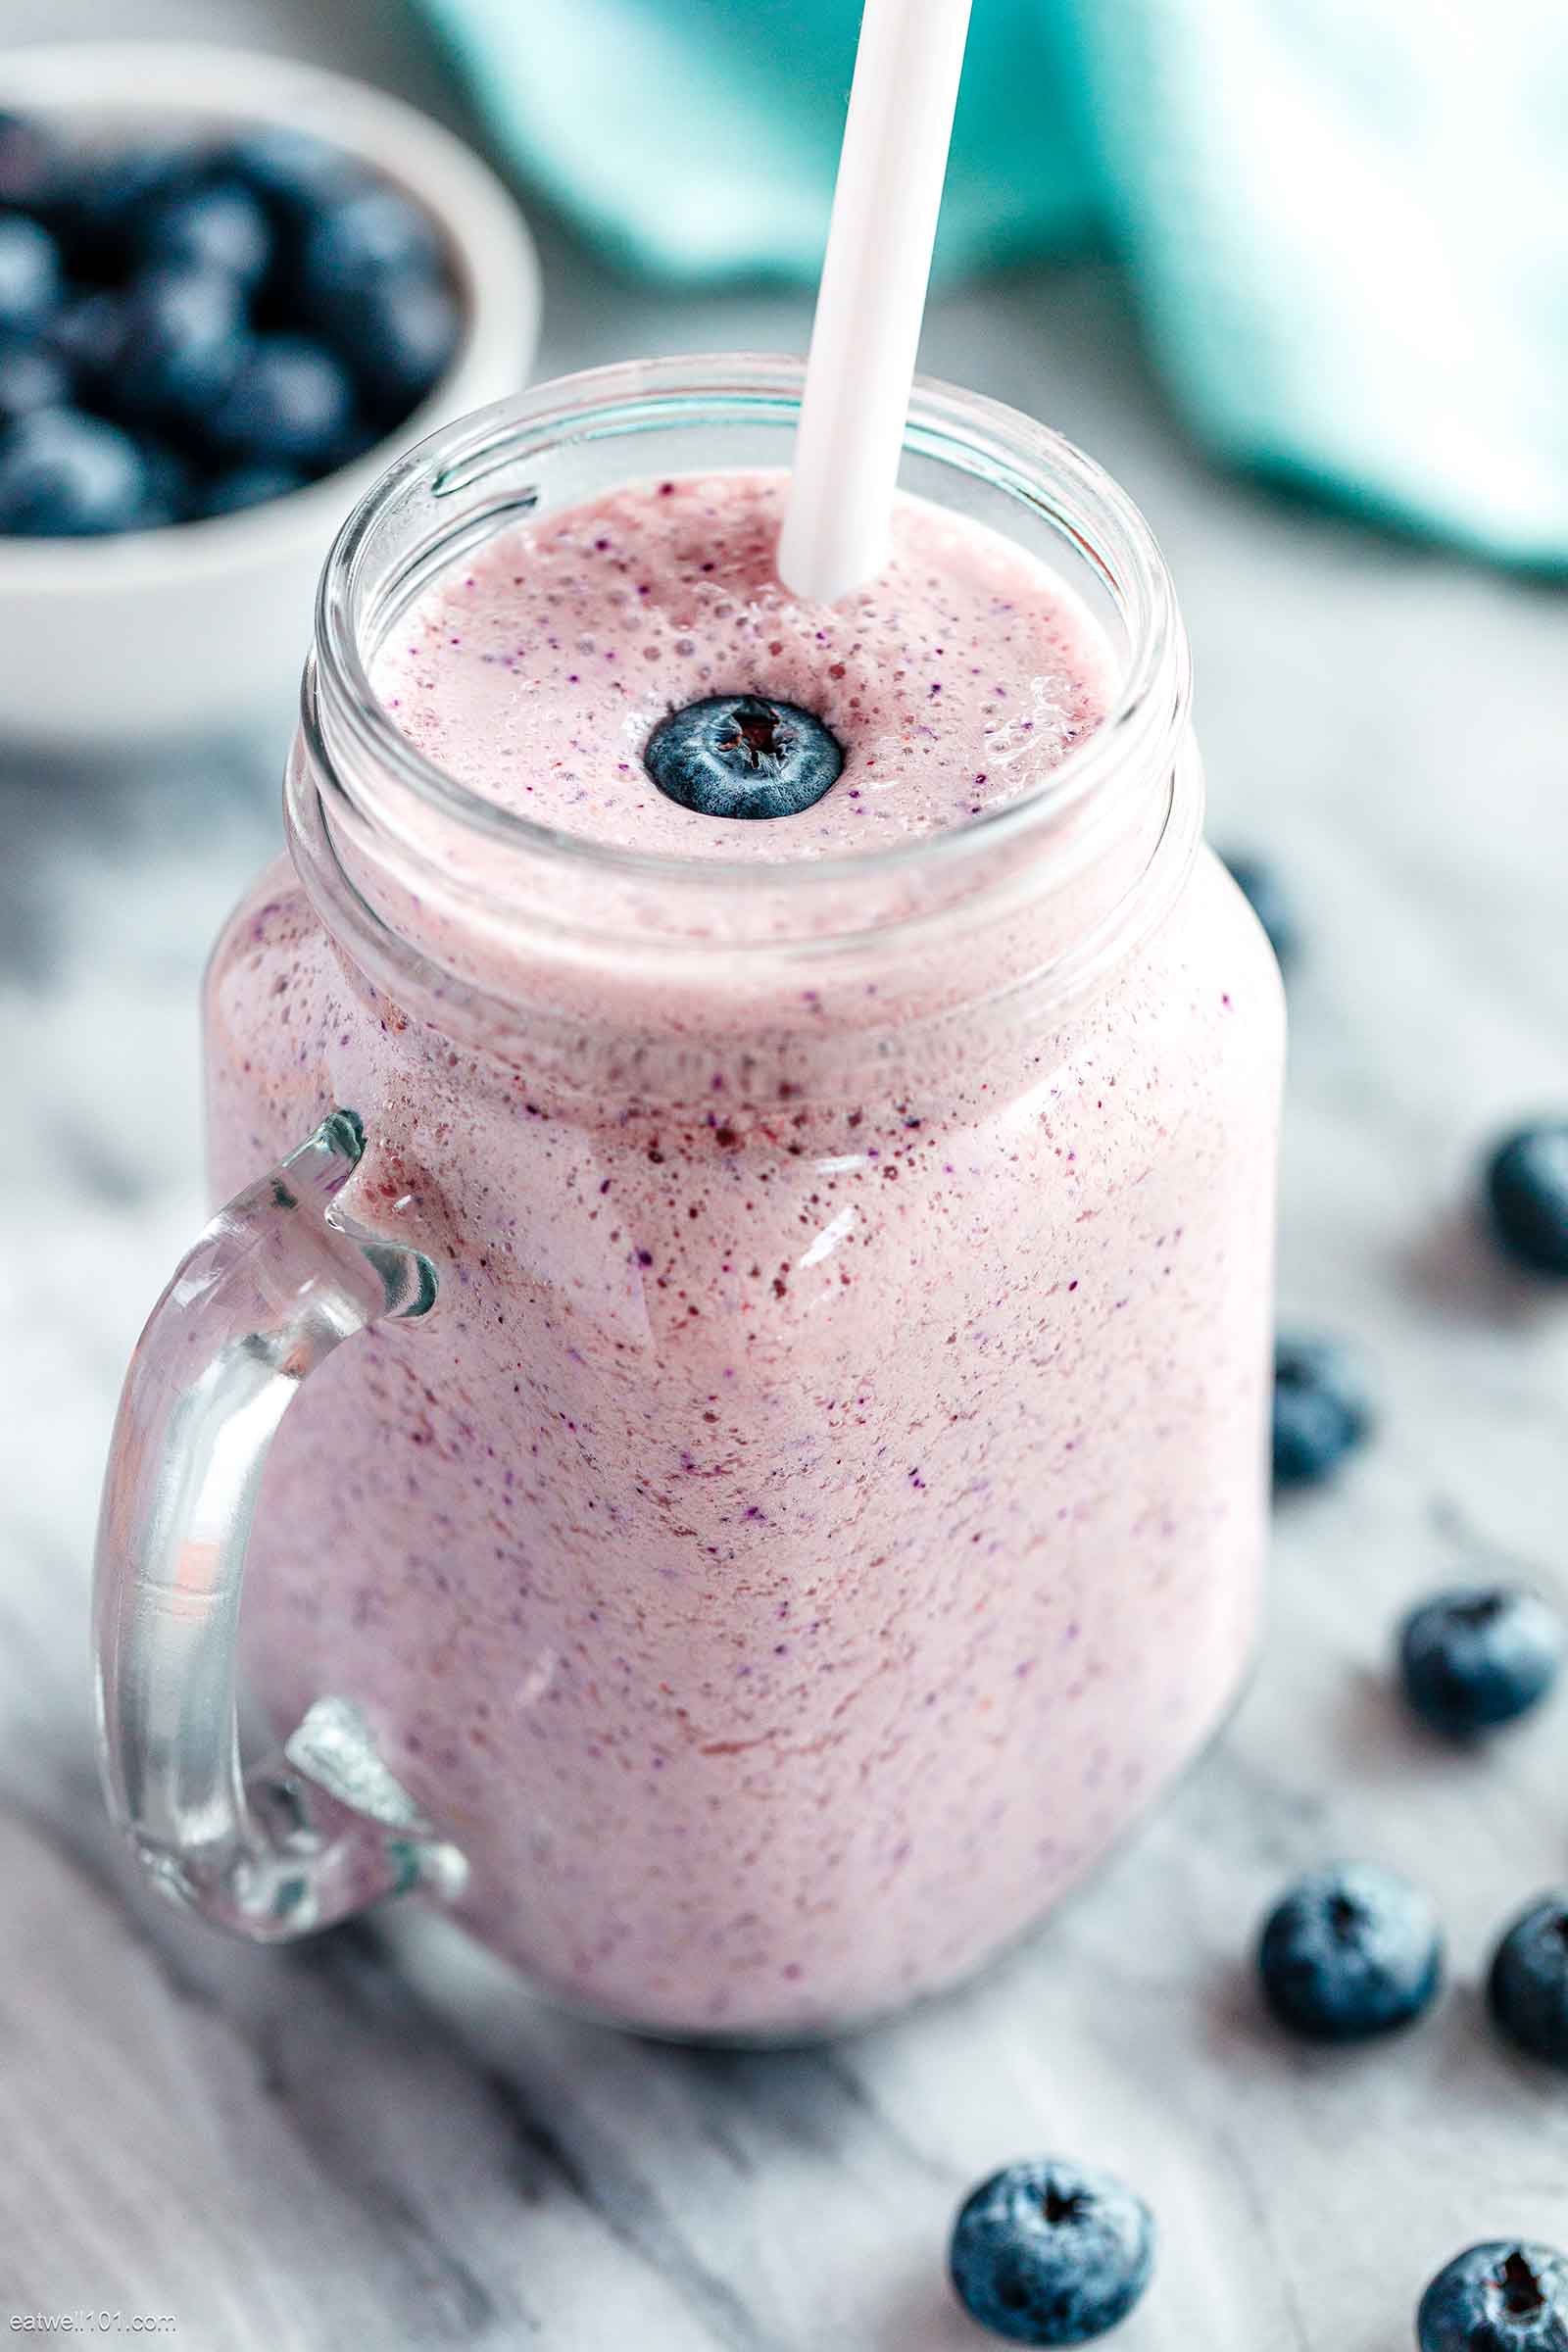 15 Best Ideas Dairy Free Smoothies – Easy Recipes To Make at Home